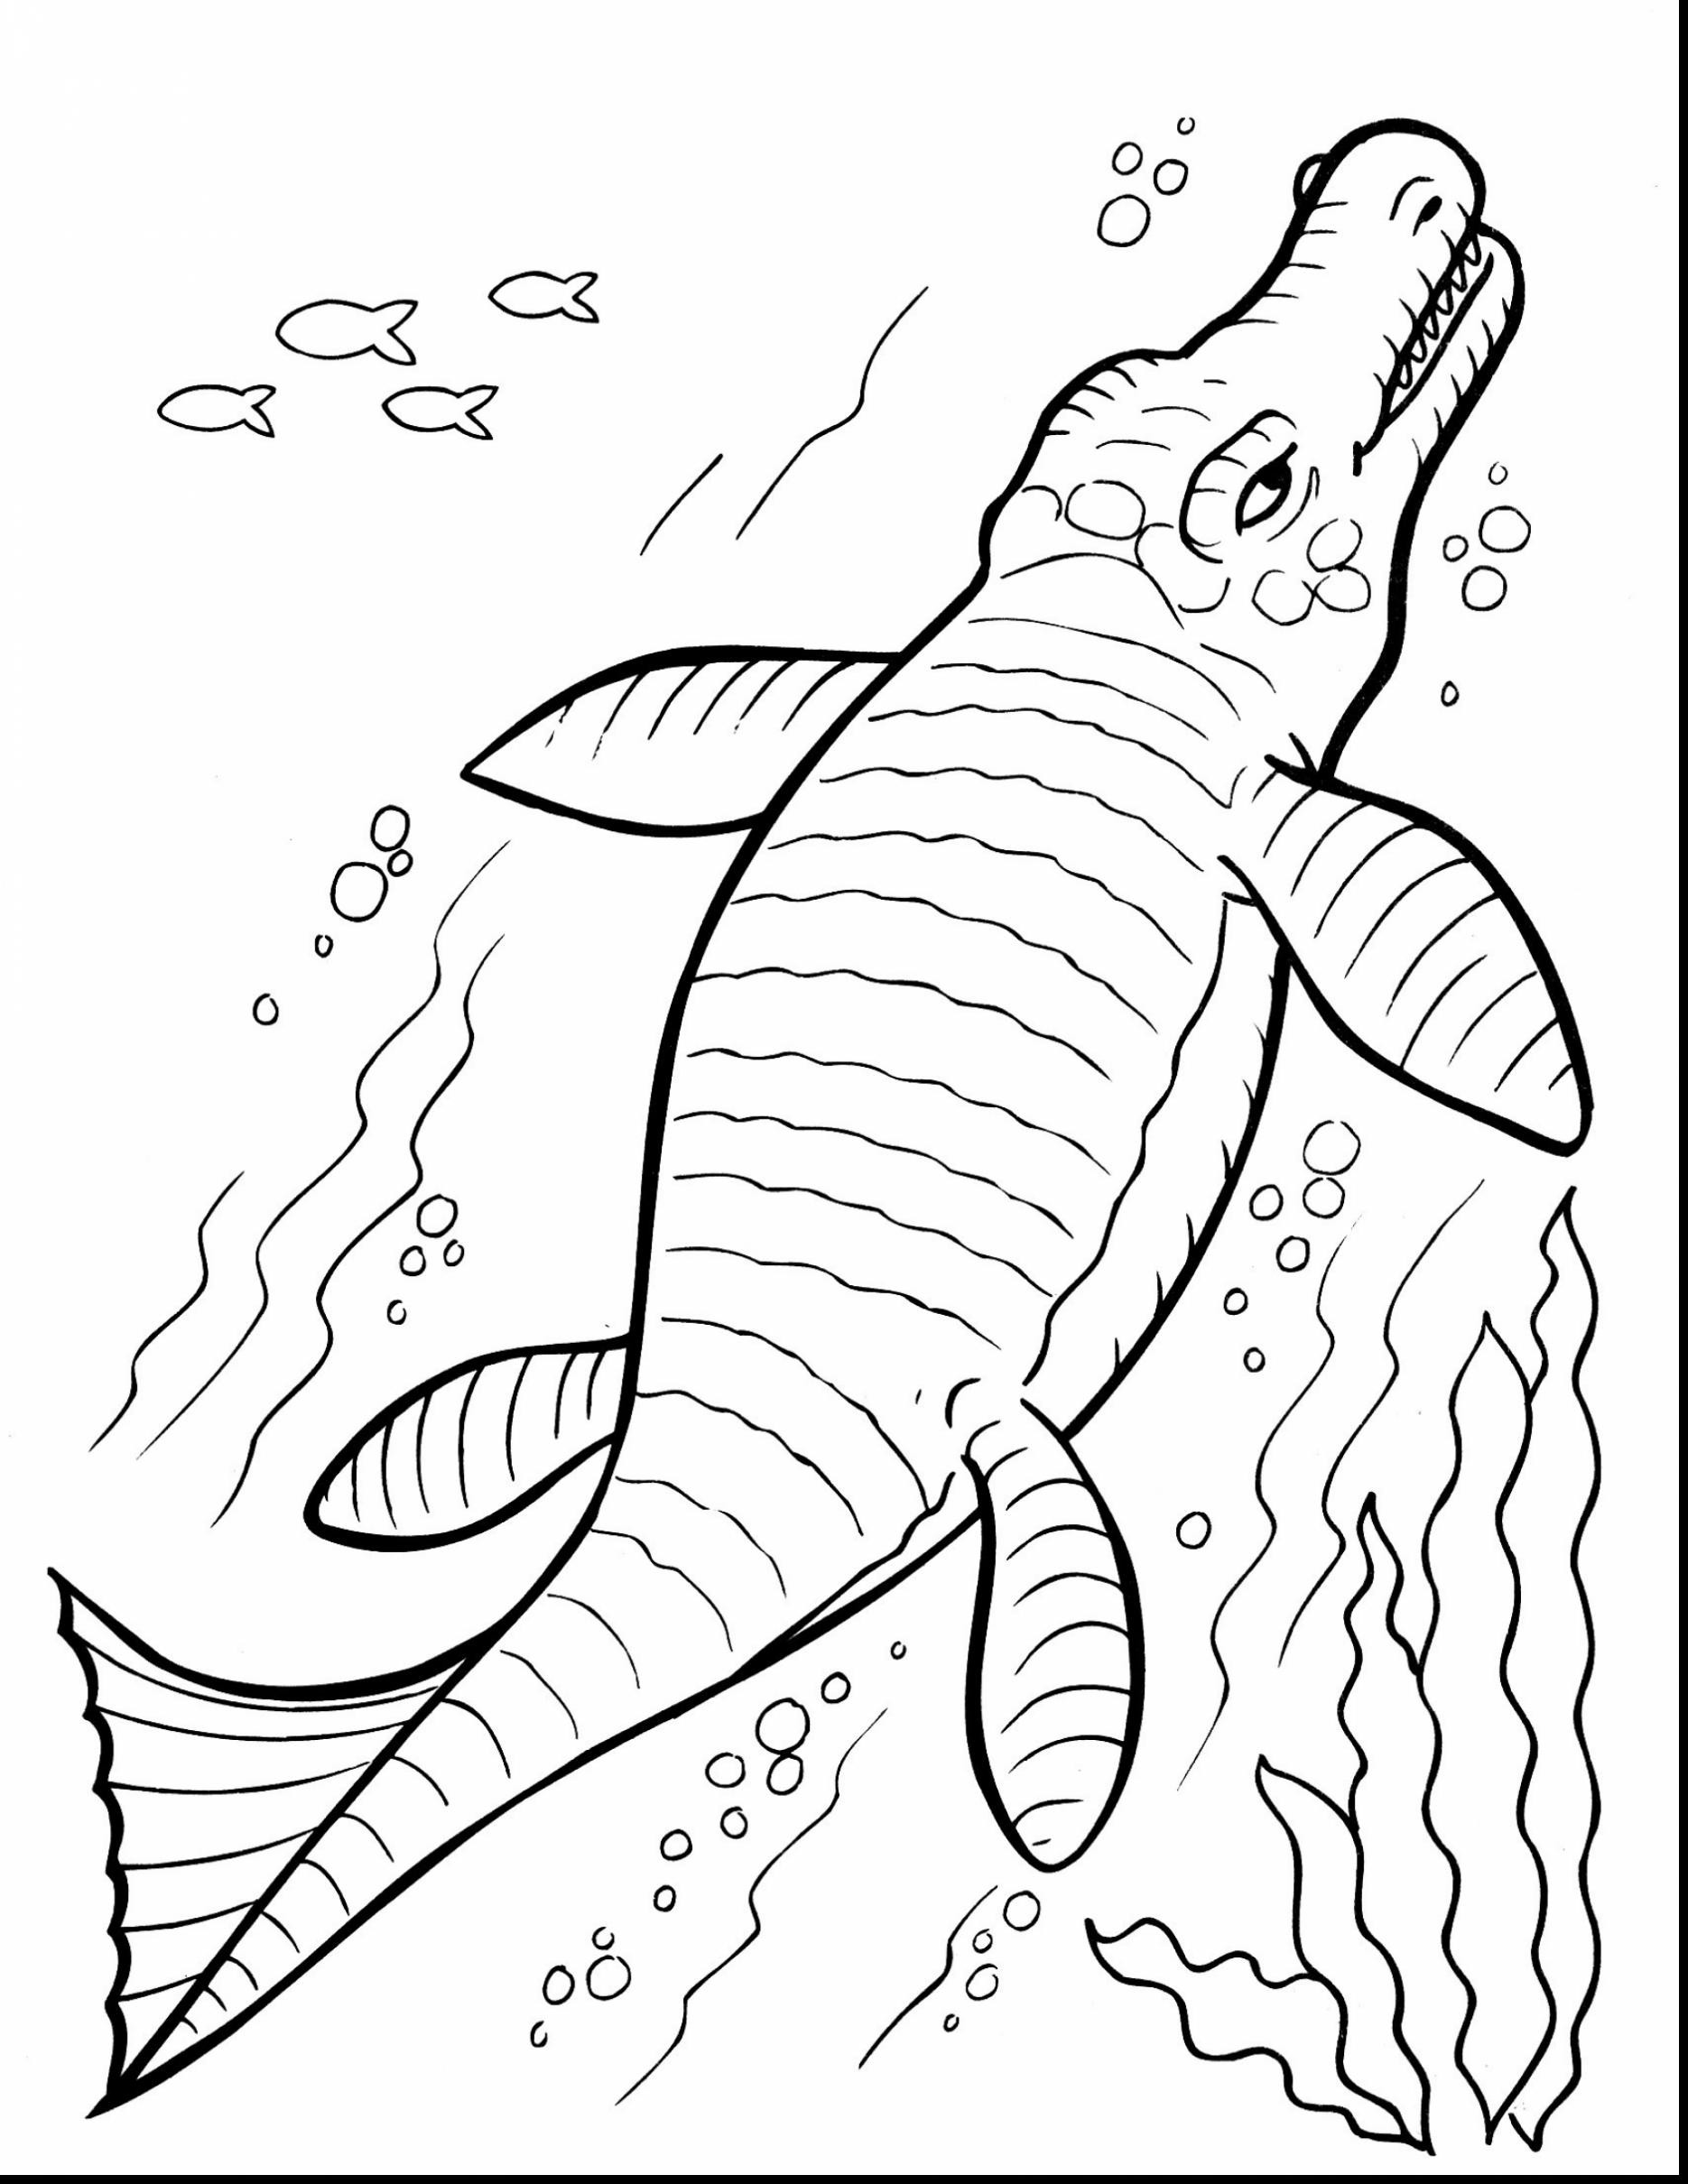 Surprising Printable C Stockphotos Dinosaur Coloring Pages Pdf At Throughout